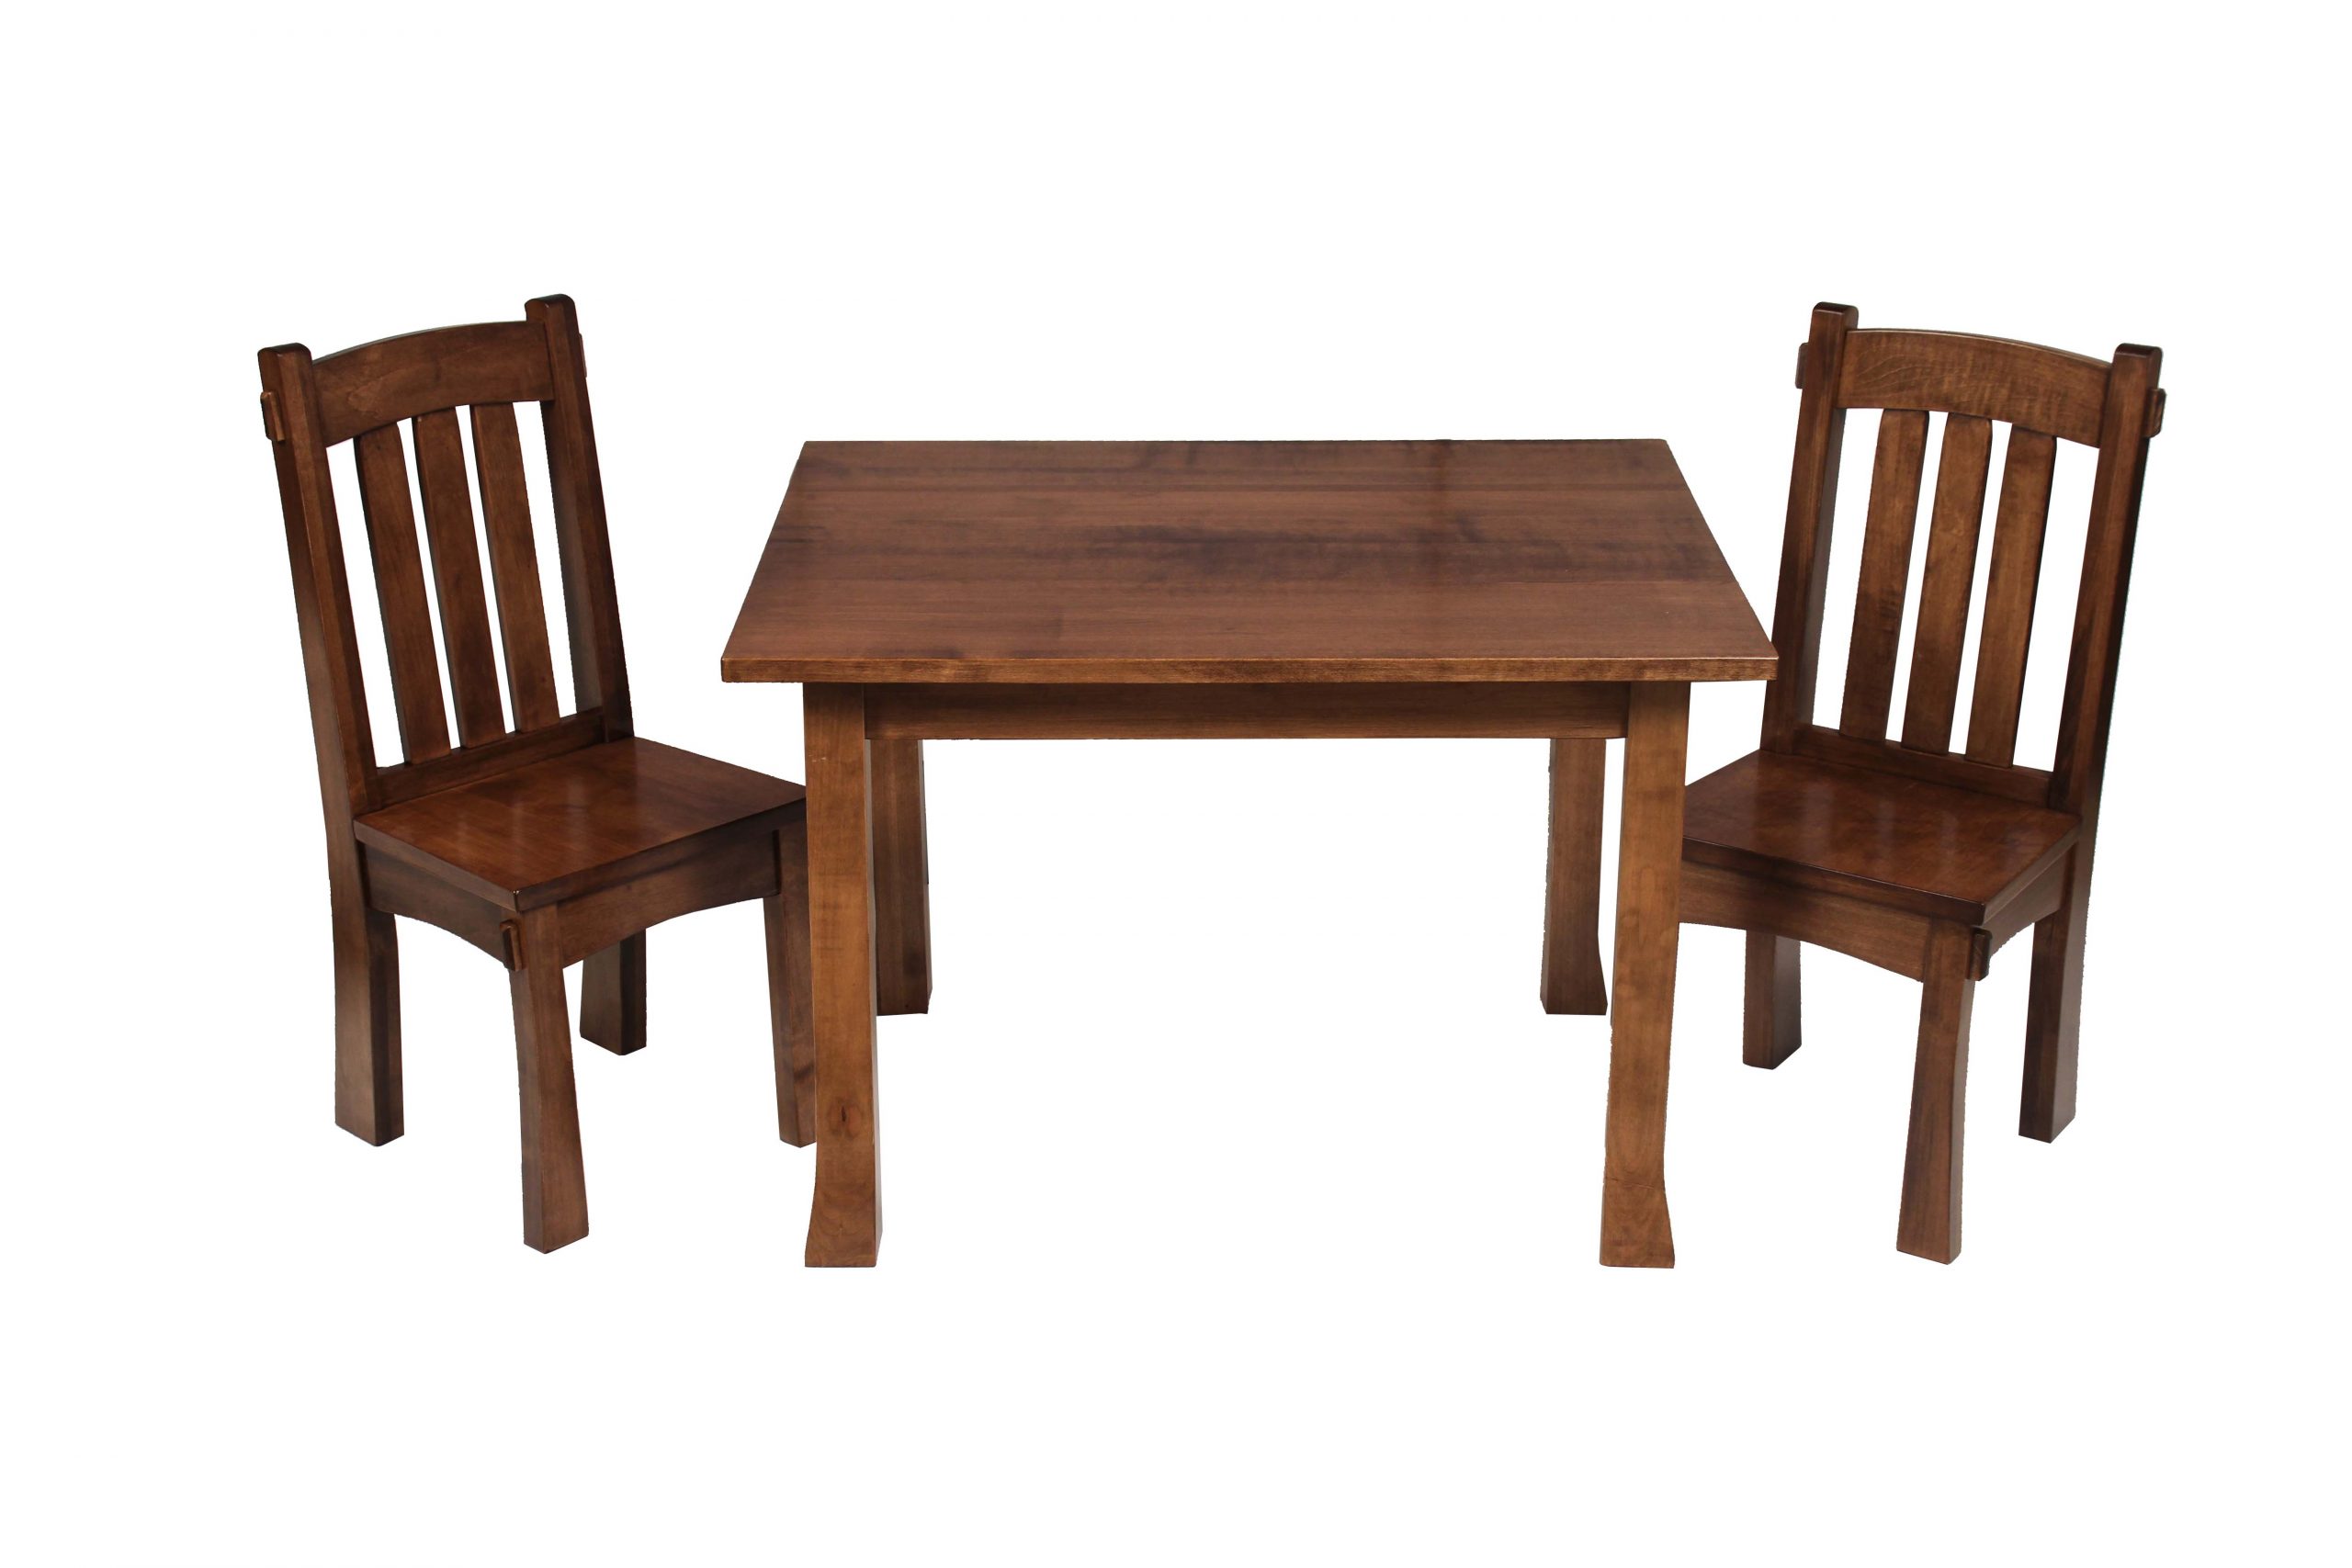 Mission Childs Table and Chairs - Amish Furniture of Austin